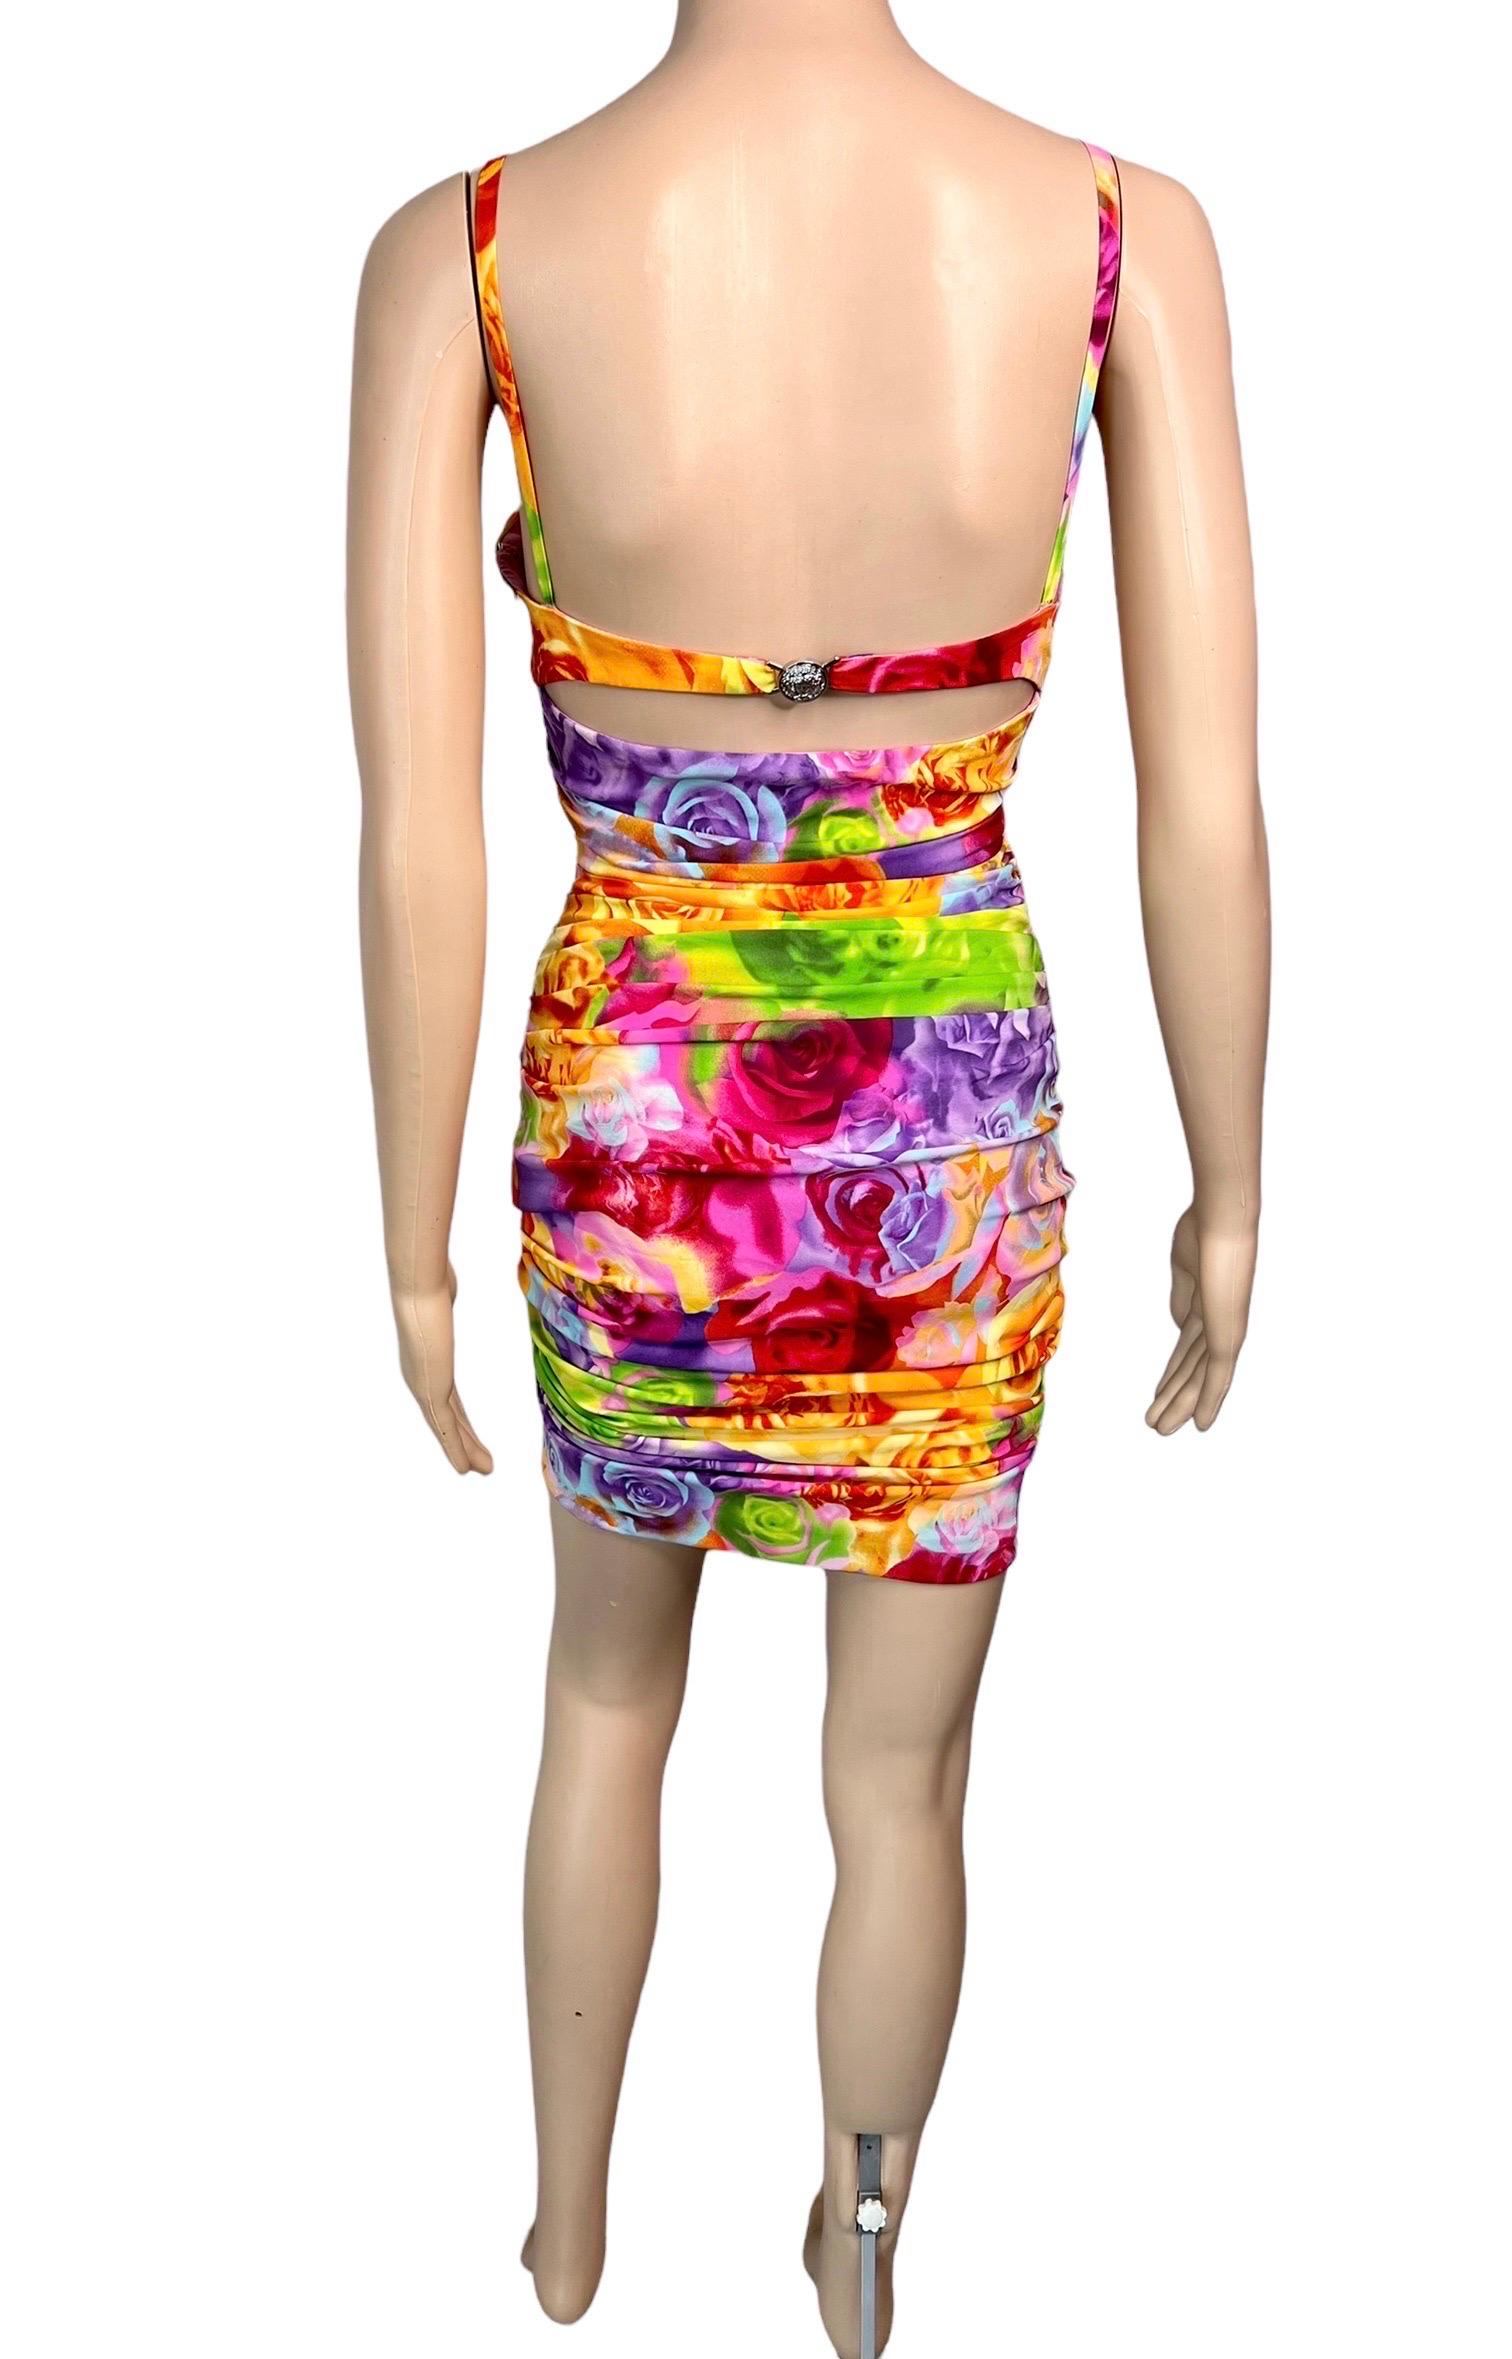 Women's Versace S/S 2005 Bustier Bra Floral Print Bodycon Ruched Dress For Sale